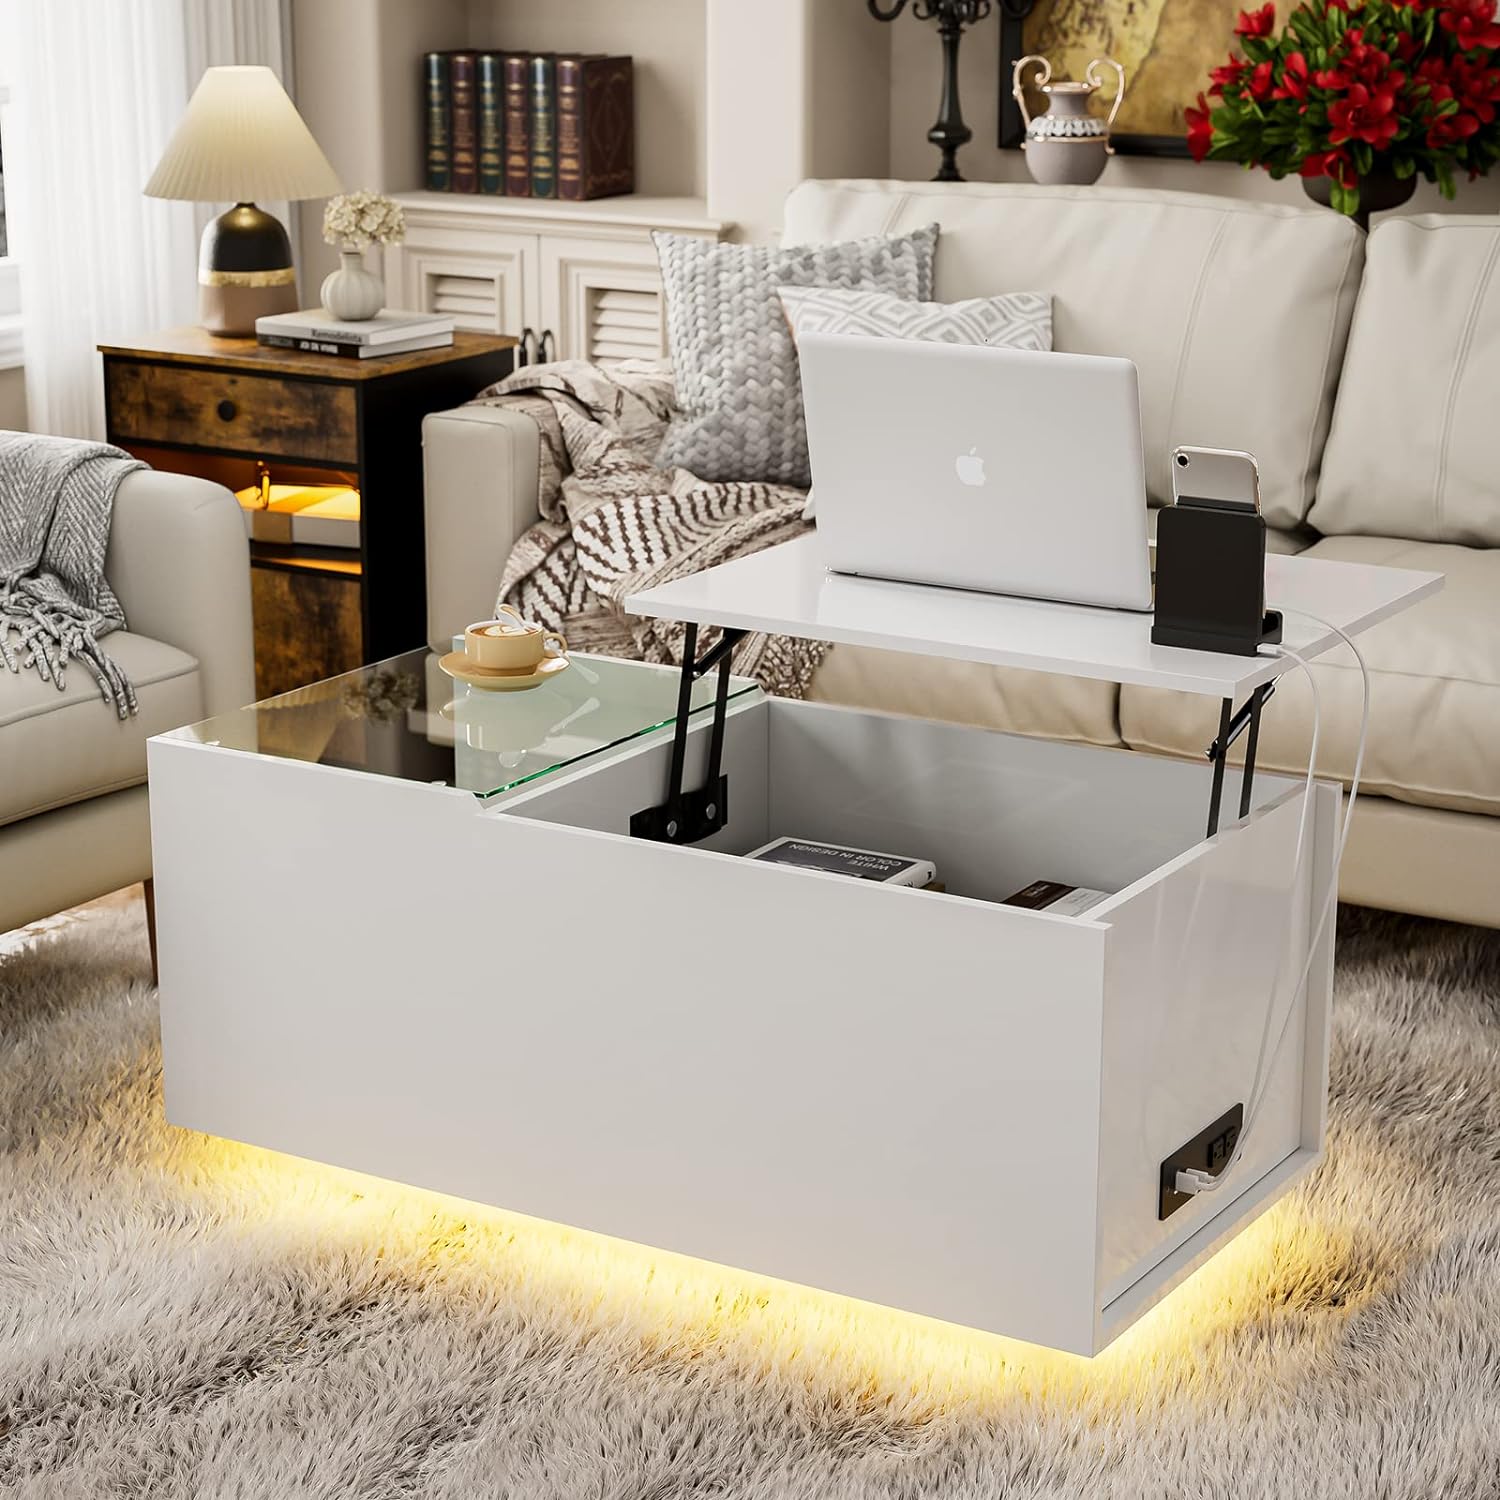 IKIFLY Lift Top Coffee Table with LED Lights & Charging Station, White Lifting Top Central Table with Glass Top Storage and Hidden Compartment for Living Room